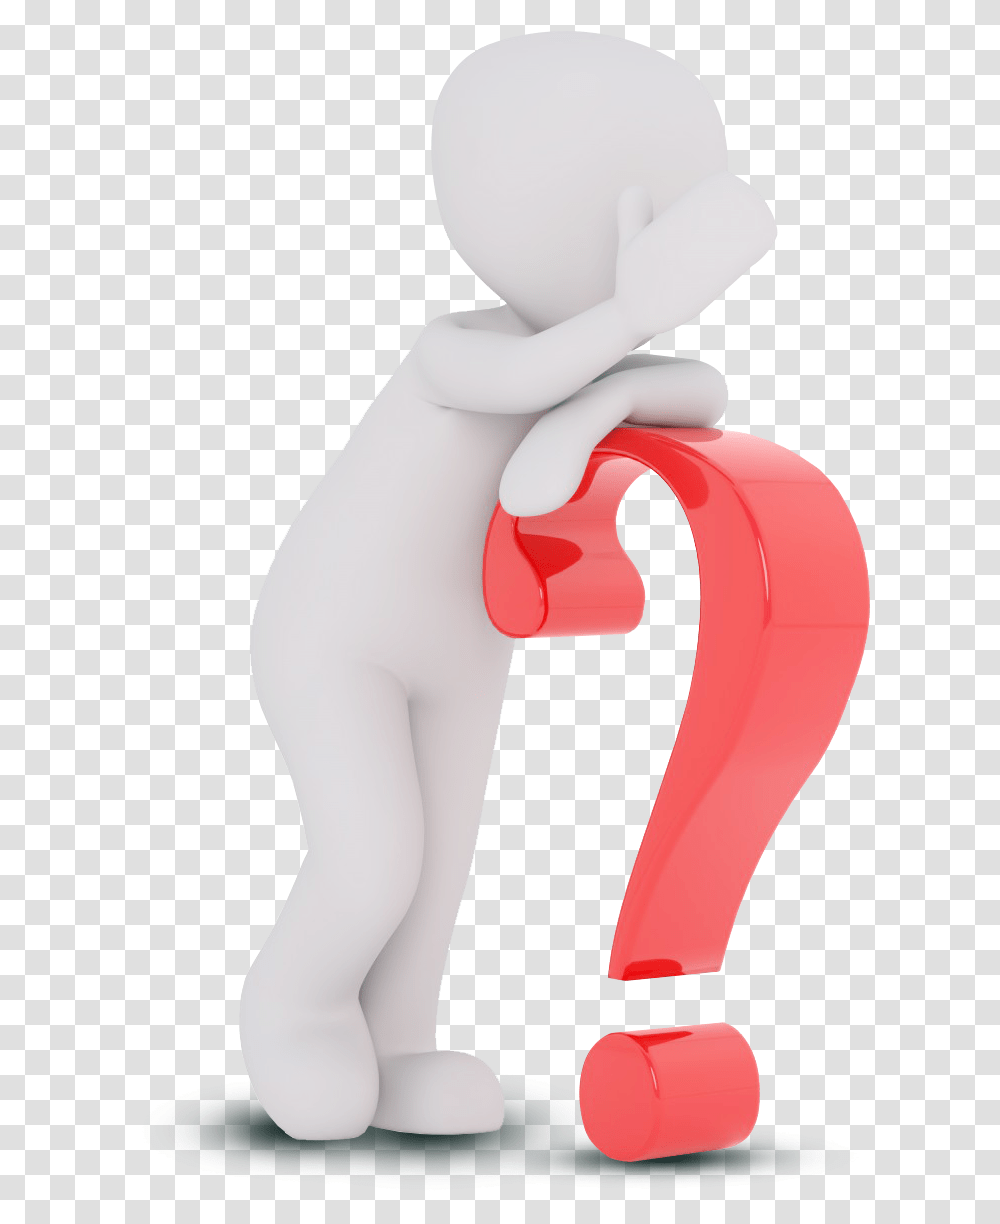 Symbol Question Mark Icon, Sweets, Food, Confectionery, Statue Transparent Png